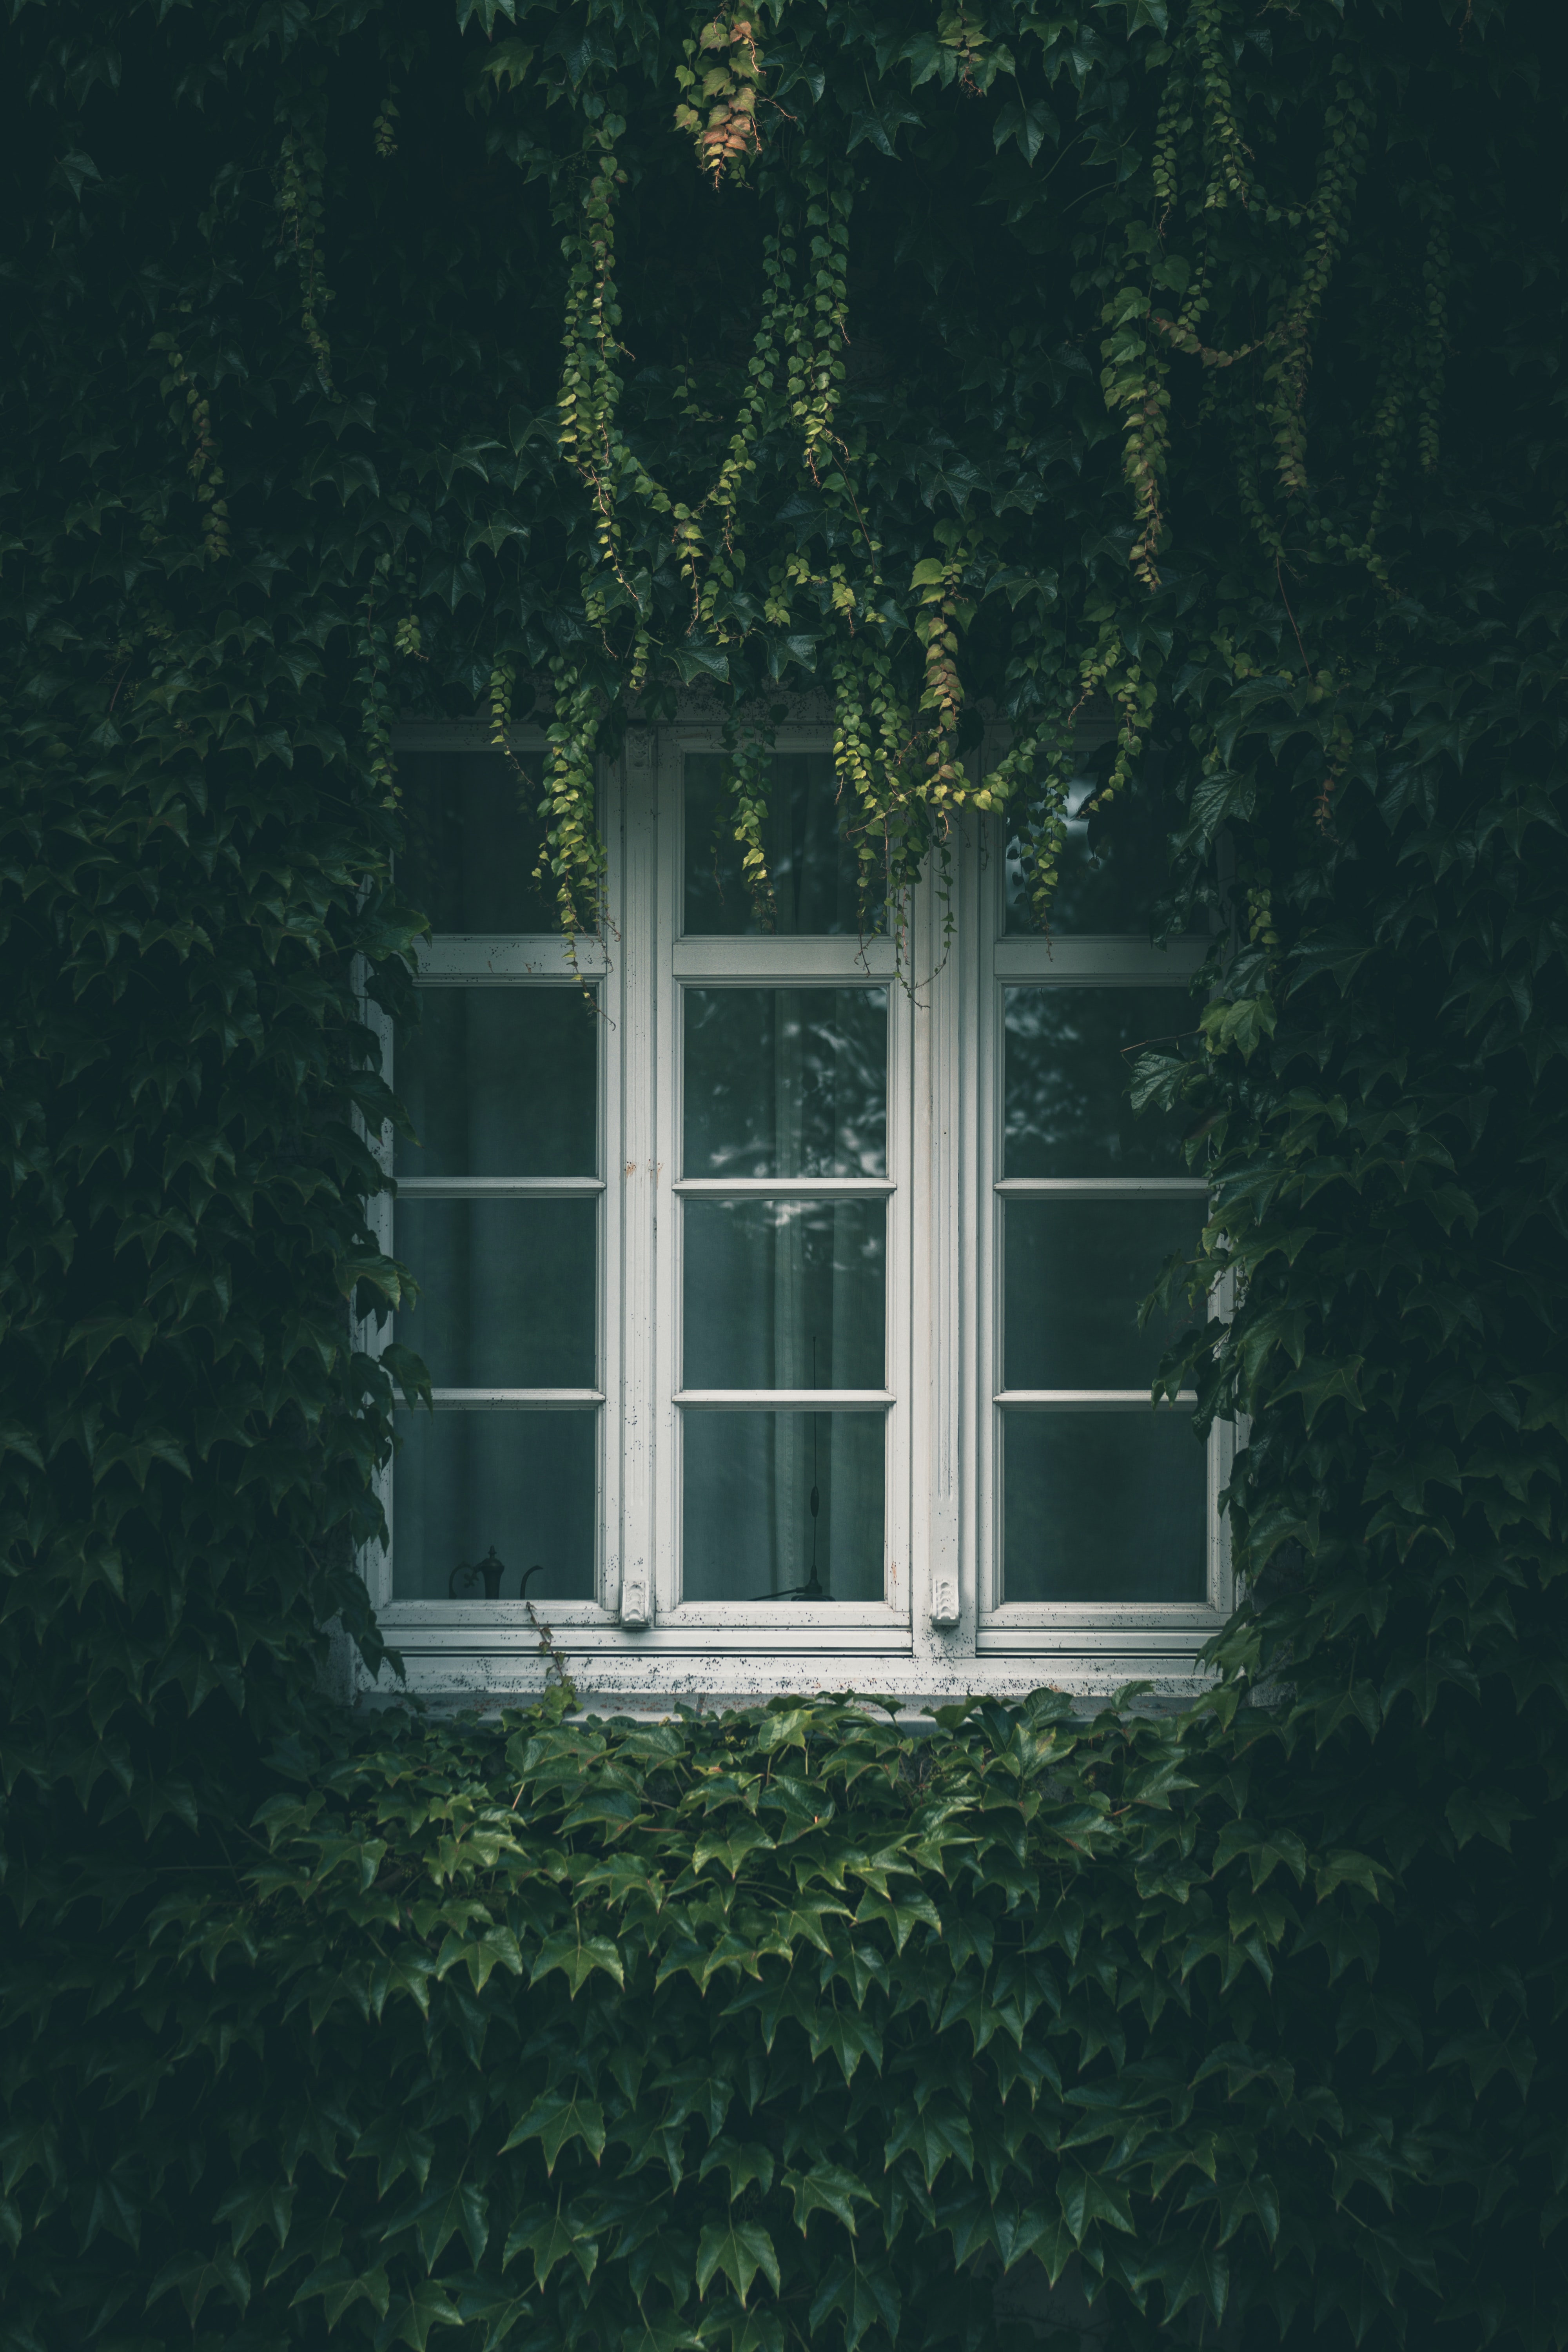 branches, miscellanea, leaves, miscellaneous, window, ivy